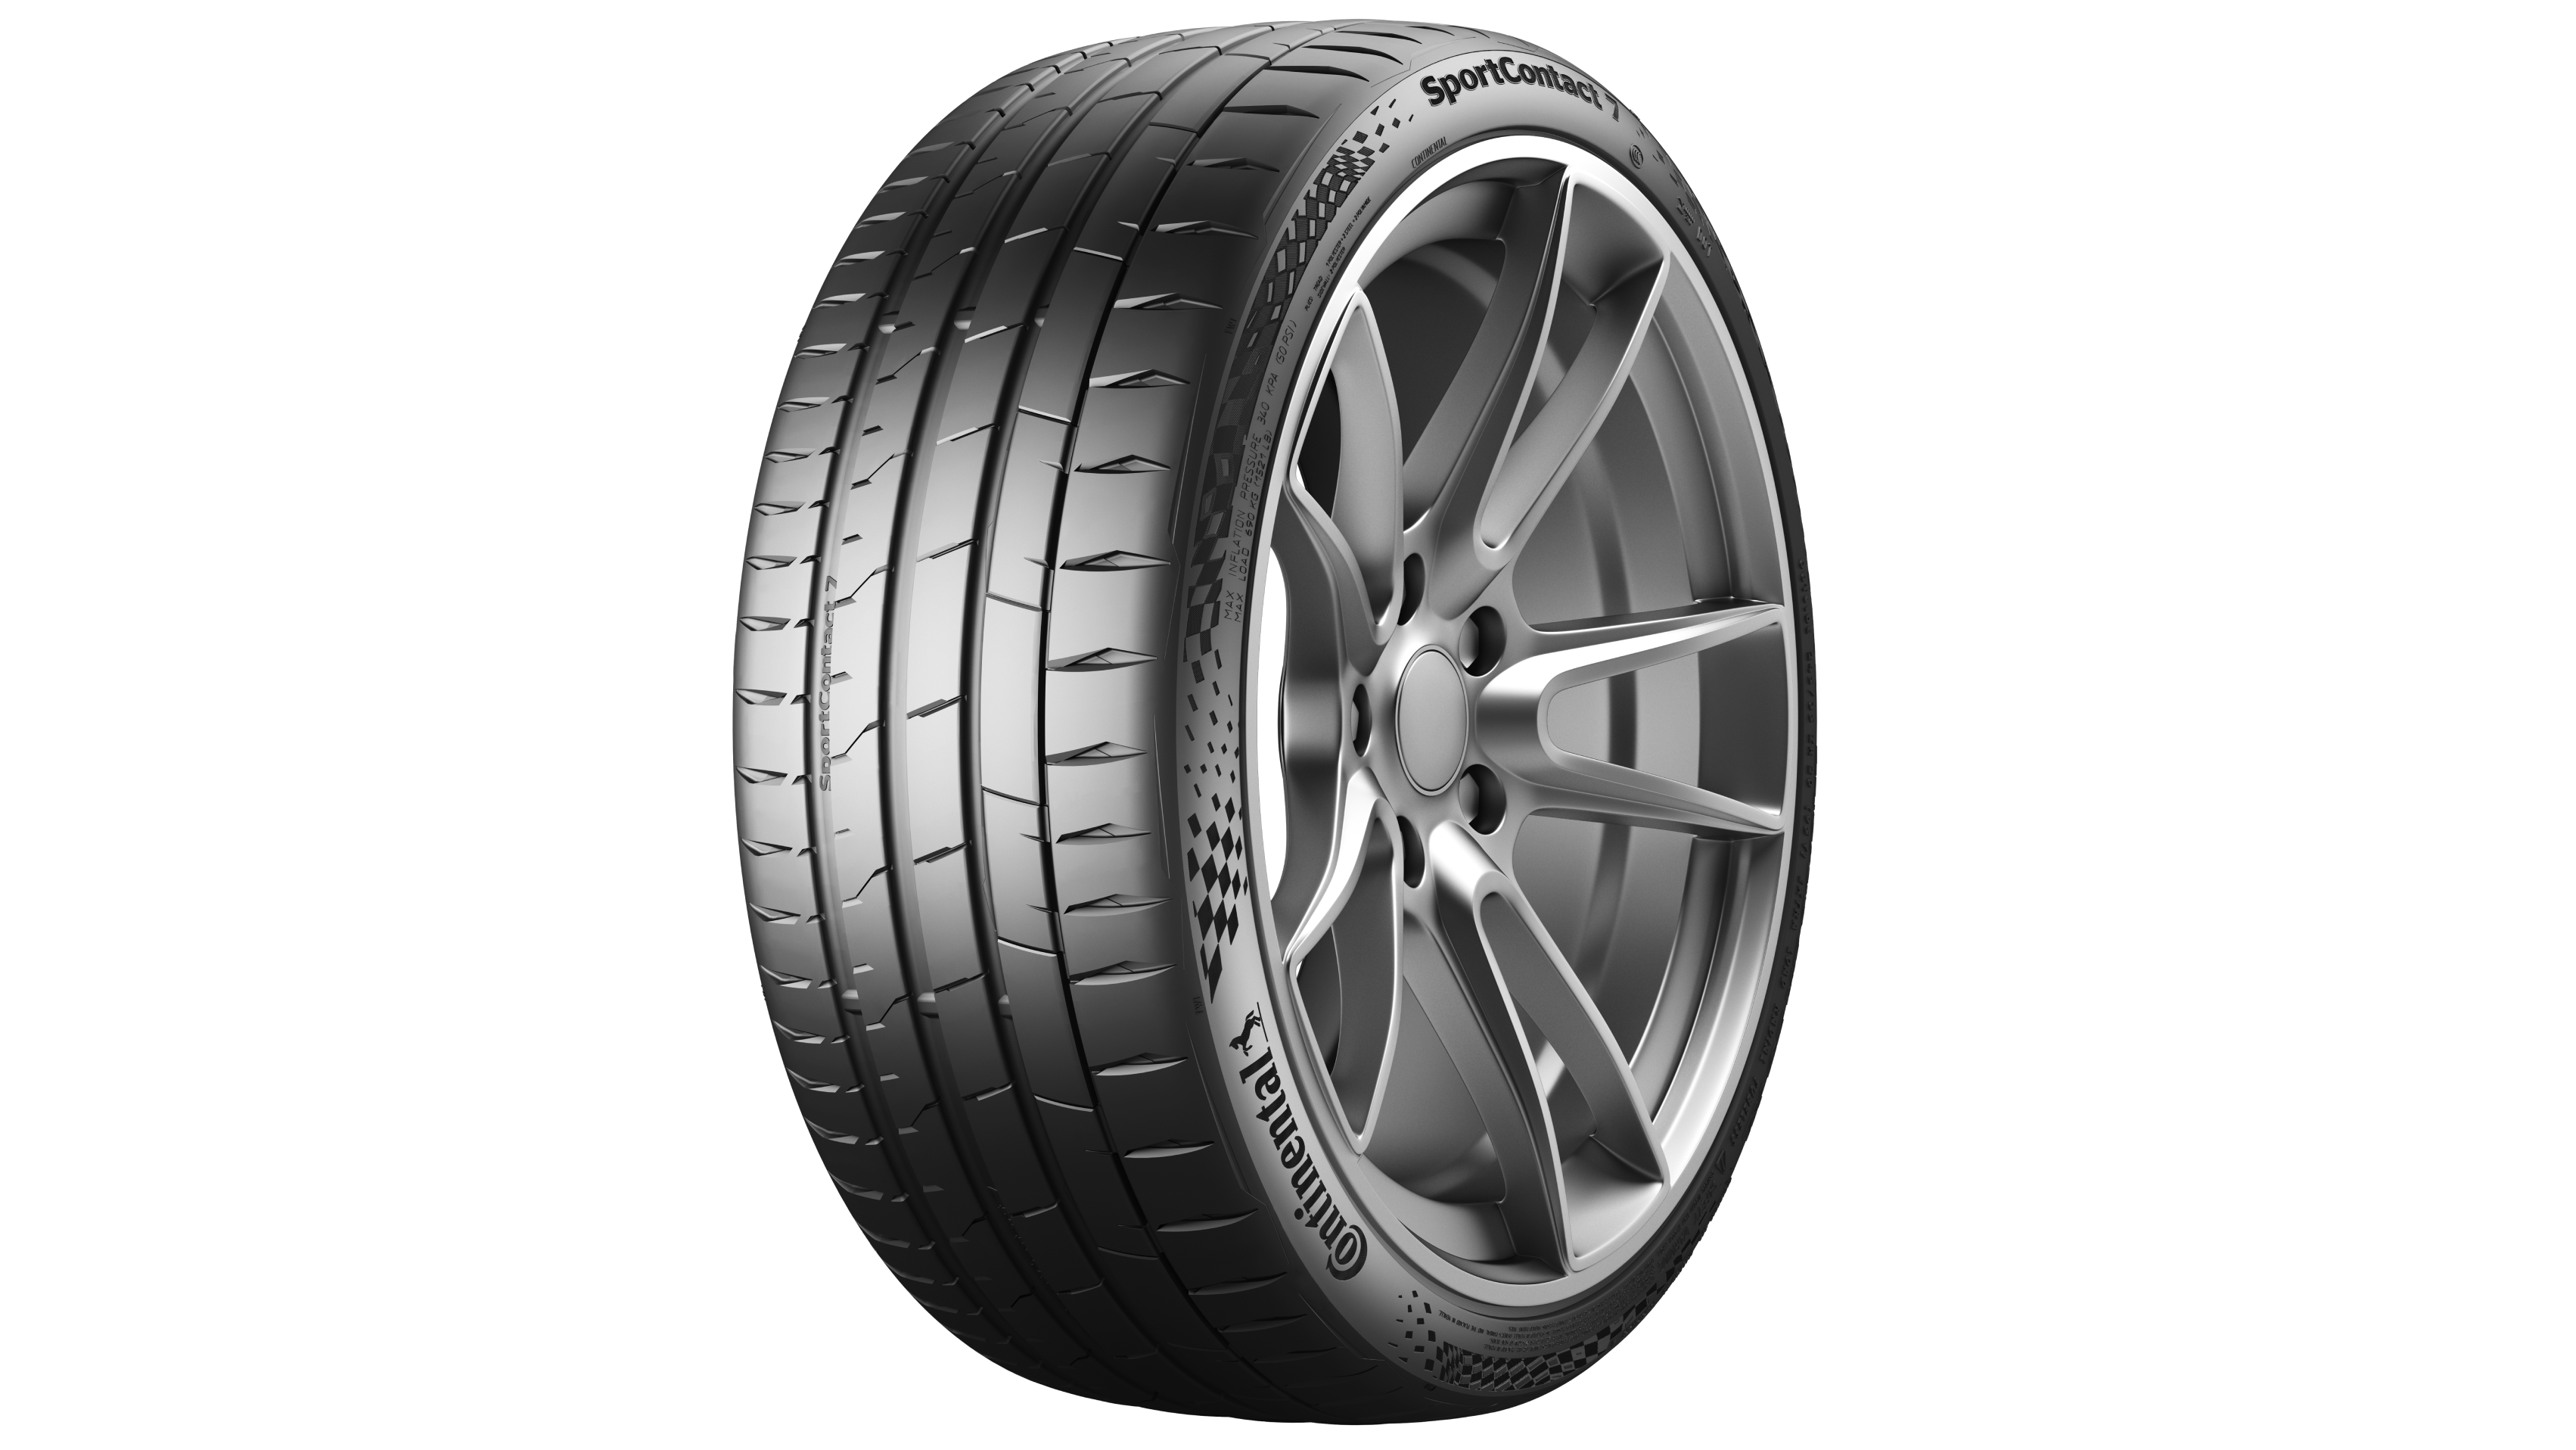 AG From On The Other i5 Tires Premium 5 and BMW - 7 come New Continental SportContact Series Continental Factory and